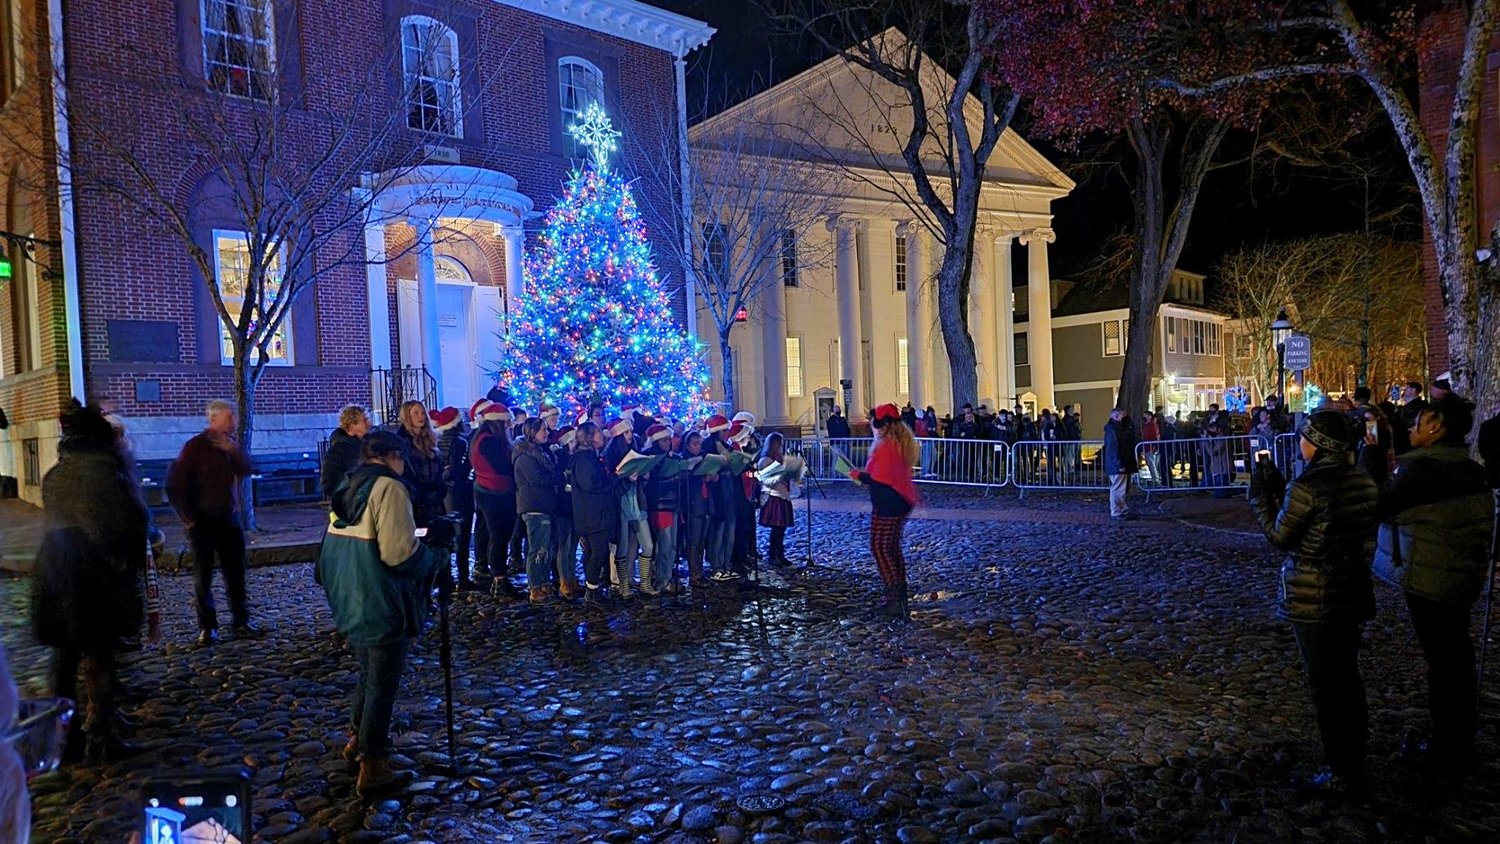 More than 1,000 people attended Friday's tree-lighting and community caroling.